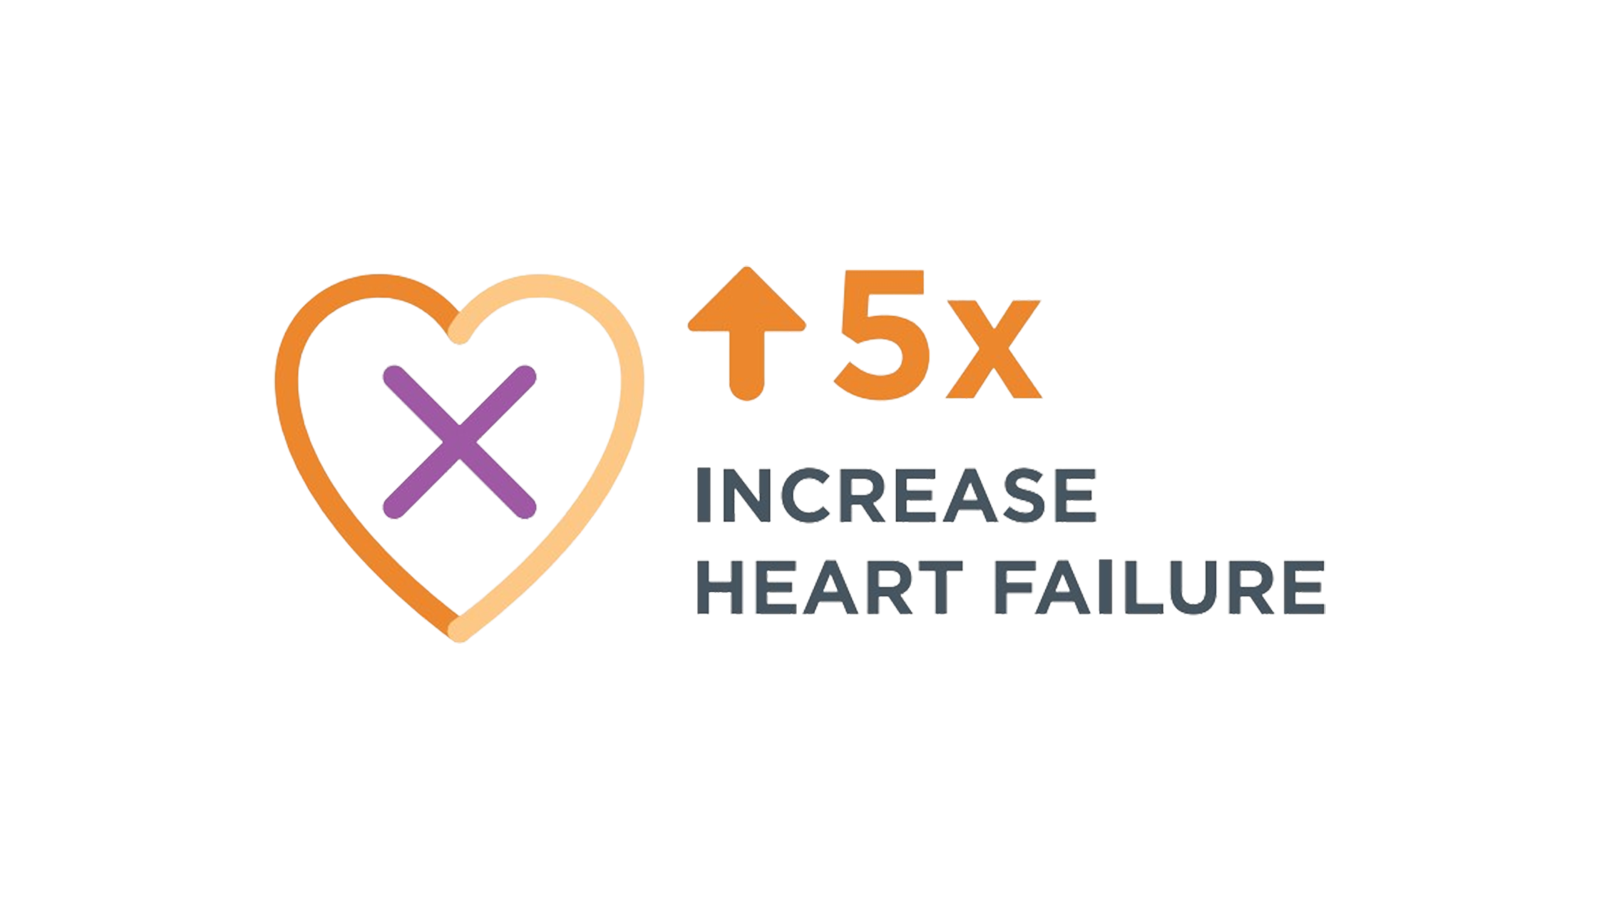 Infographic: Patients with AFib have an increased risk for life-threatening complications, including up to 5x increase in heart failure. Talk to your doctor about potential AFib risks and AFib treatment options.